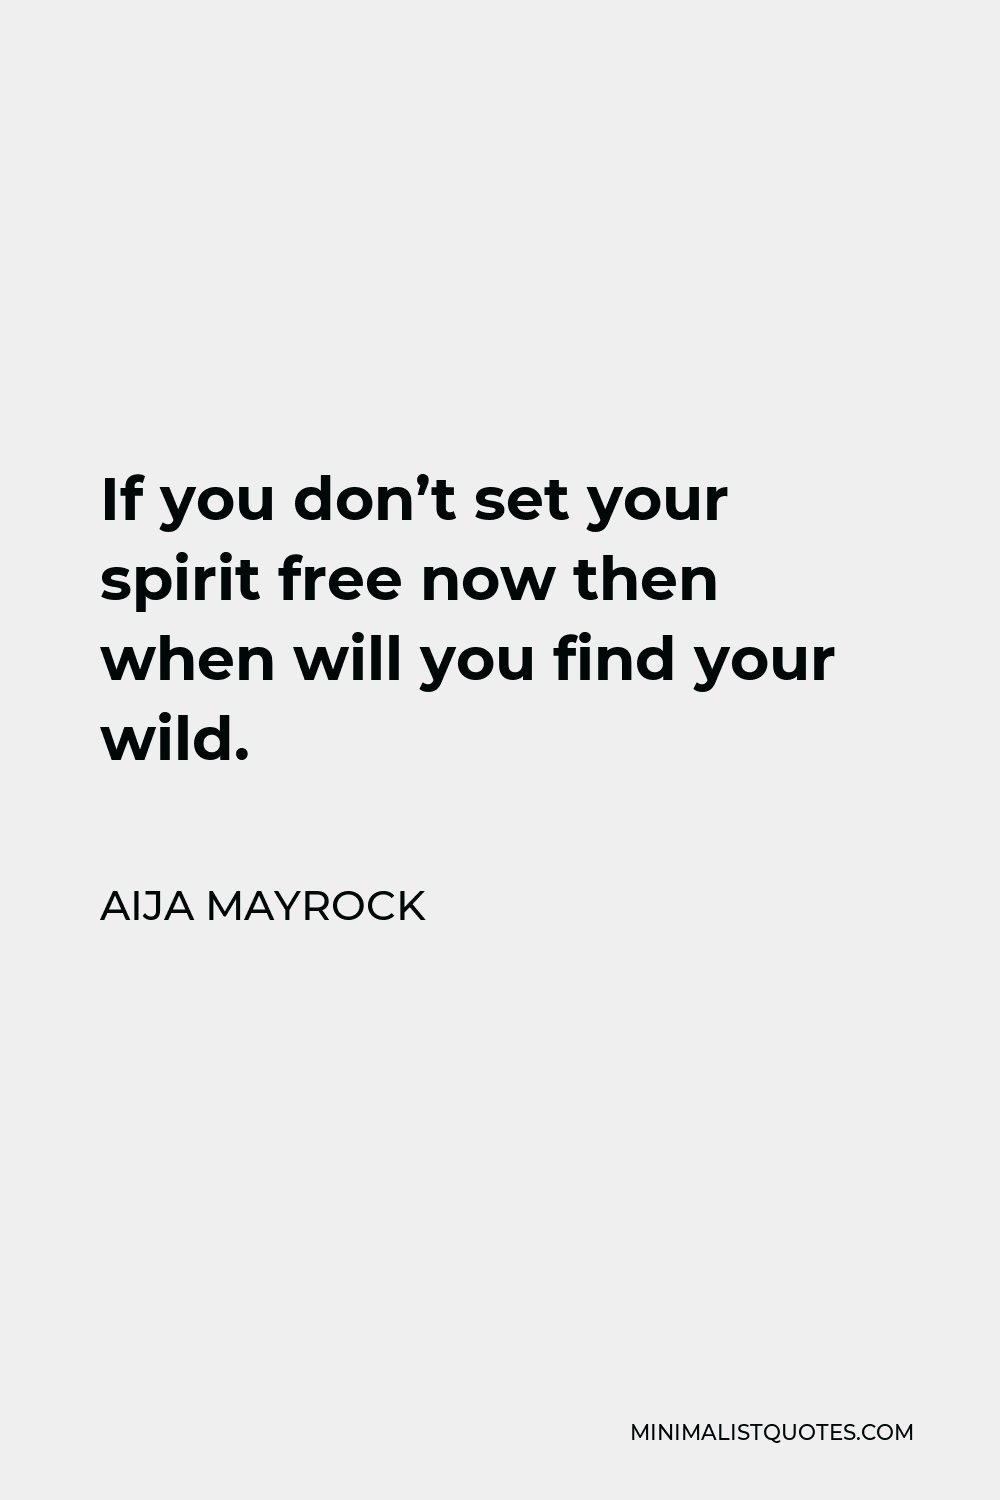 Aija Mayrock Quote - If you don’t set your spirit free now then when will you find your wild.